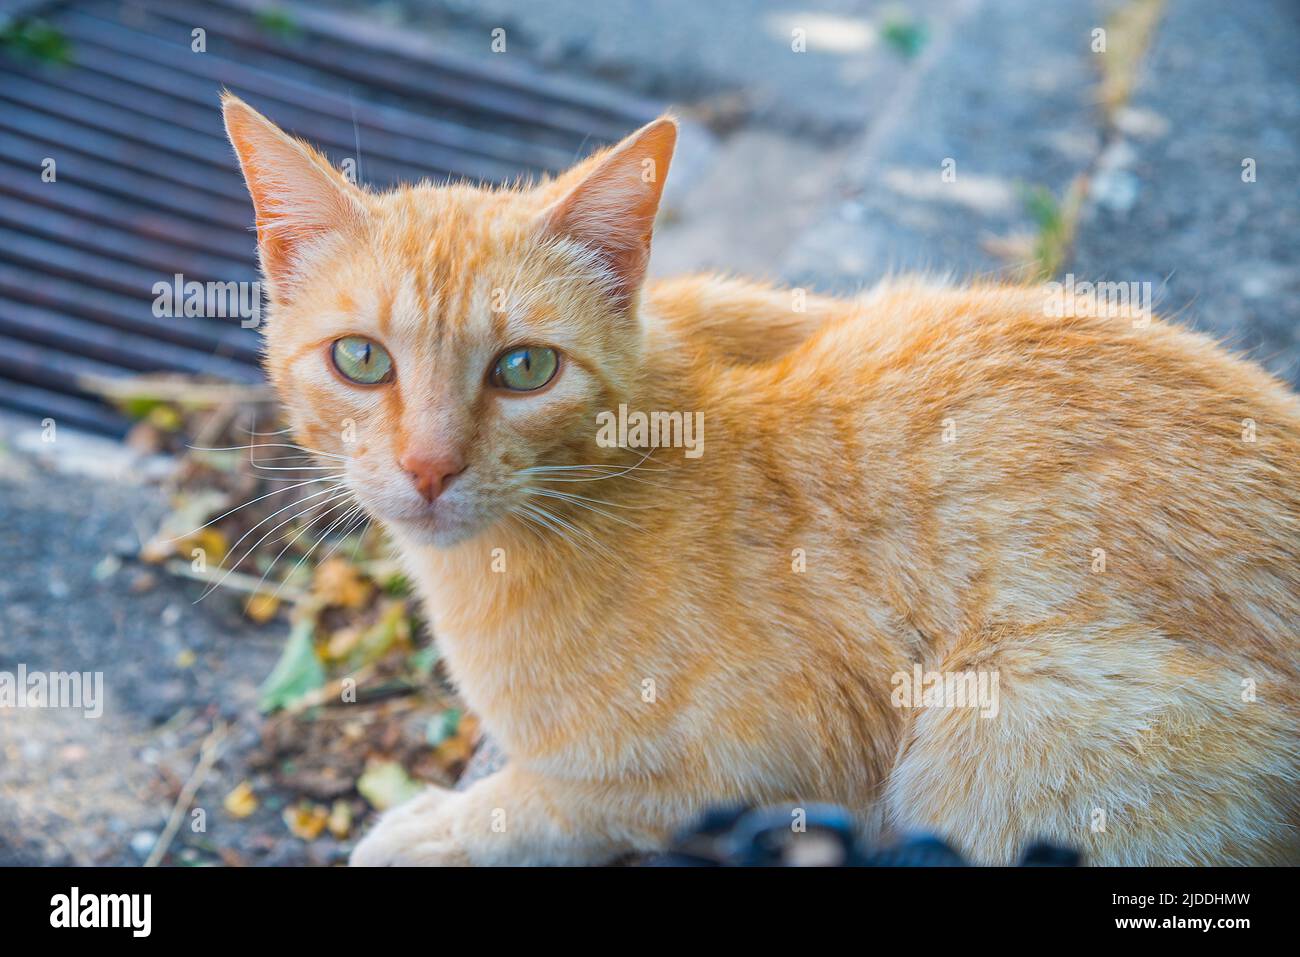 Tabby cat looking at the camera. Close view. Stock Photo